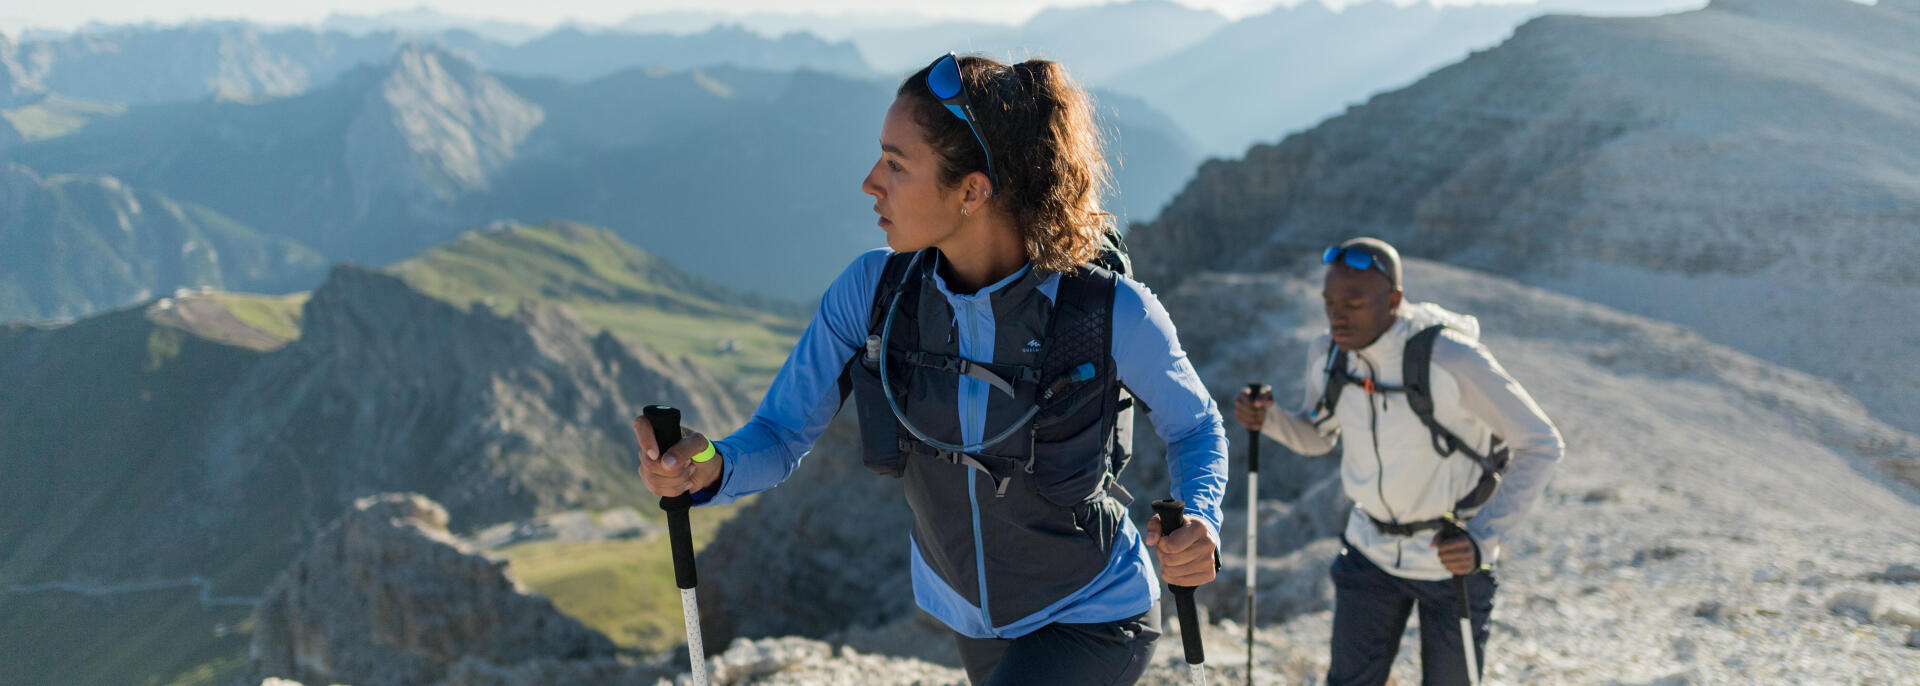 Why not return to your favourite hiking spots to try out some speed hiking?